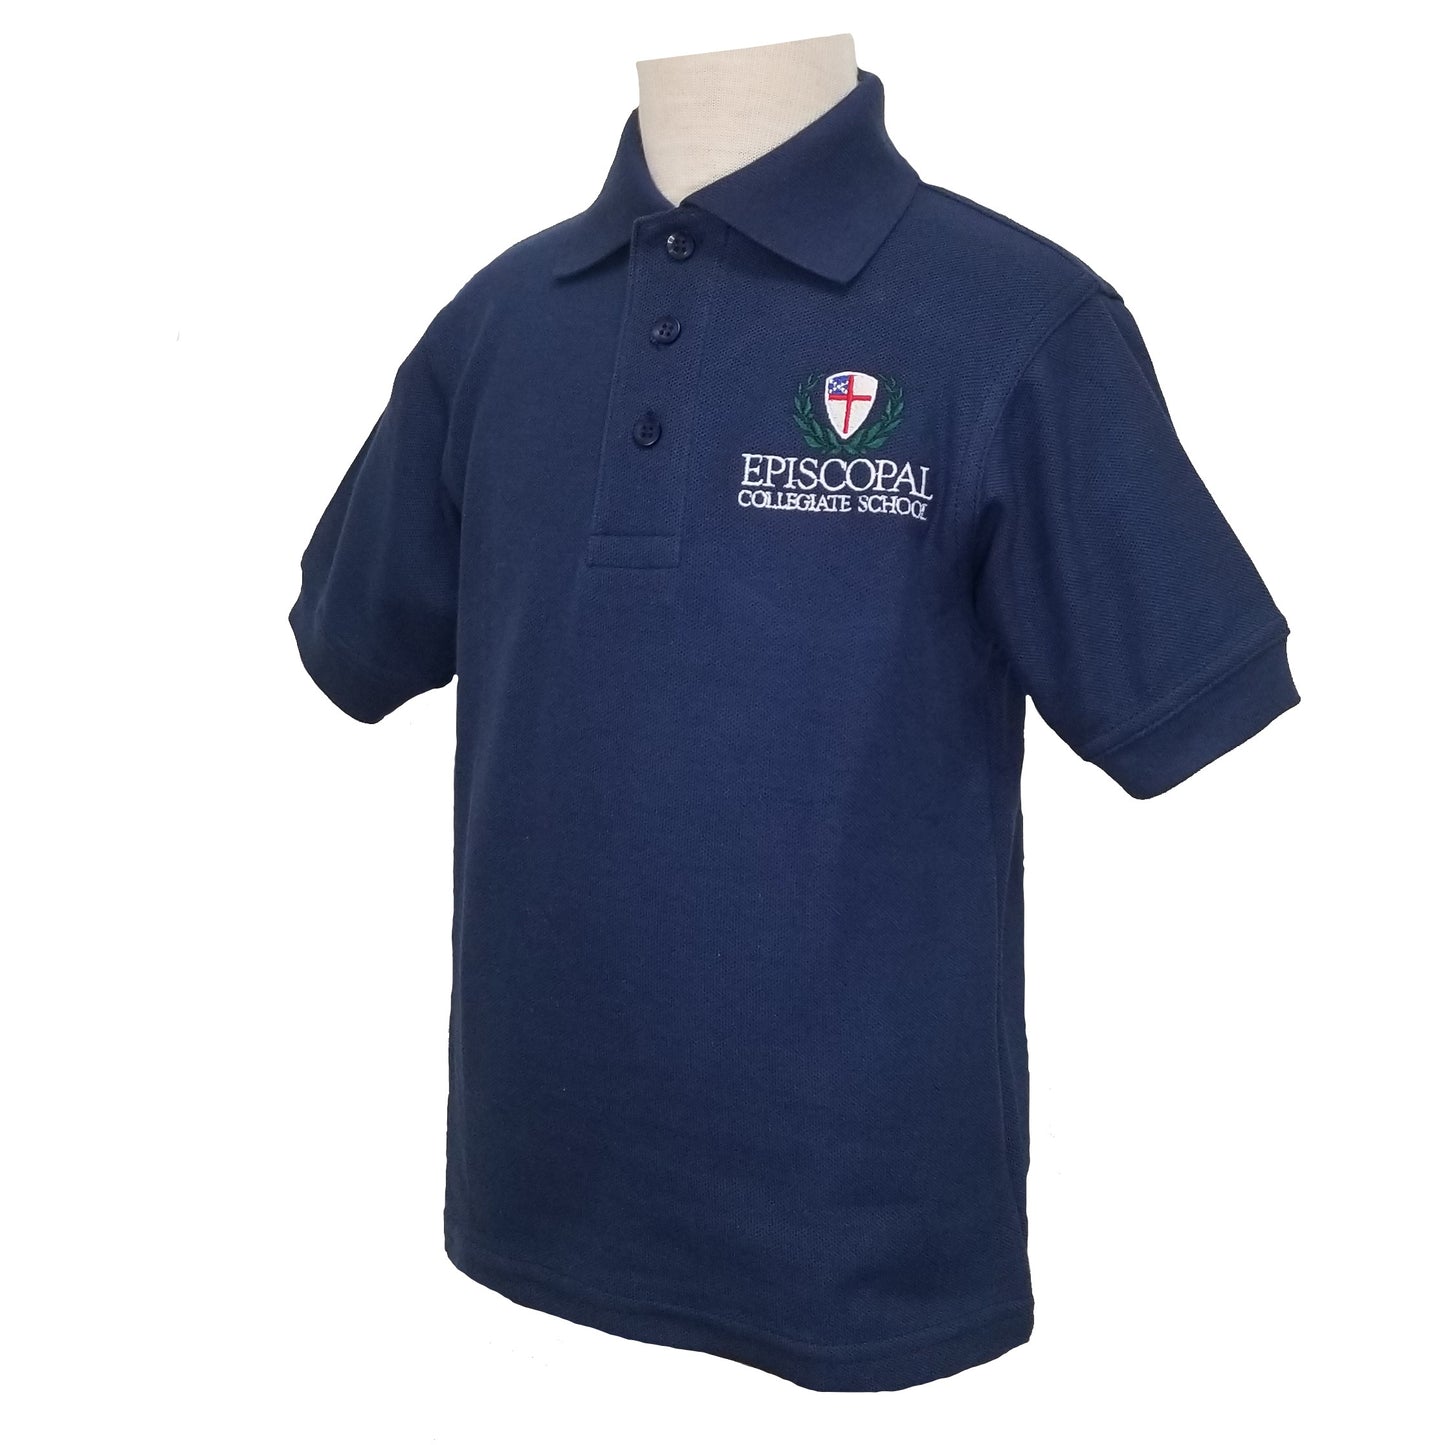 Youth Short Sleeve Polo With Episcopal Collegiate Logo